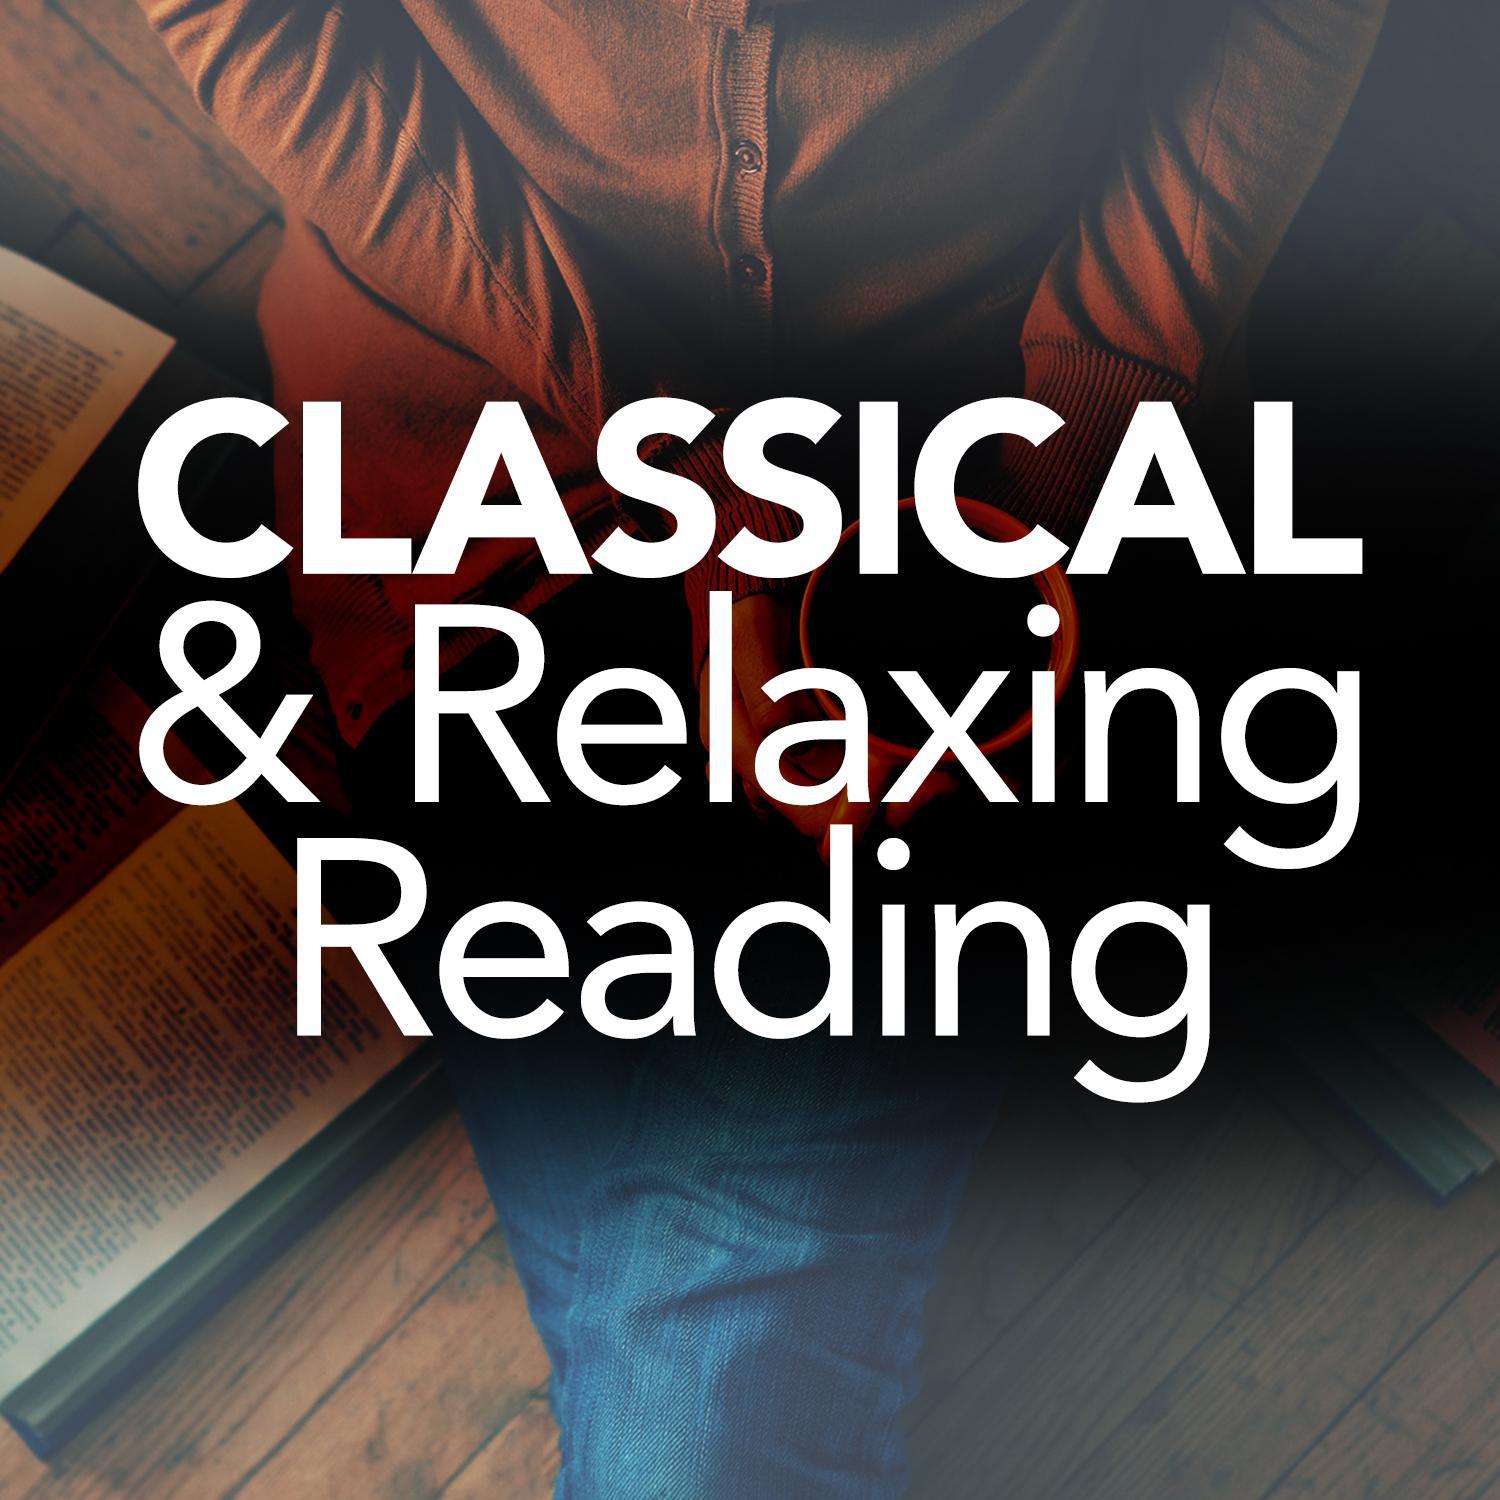 Classical & Relaxing Reading